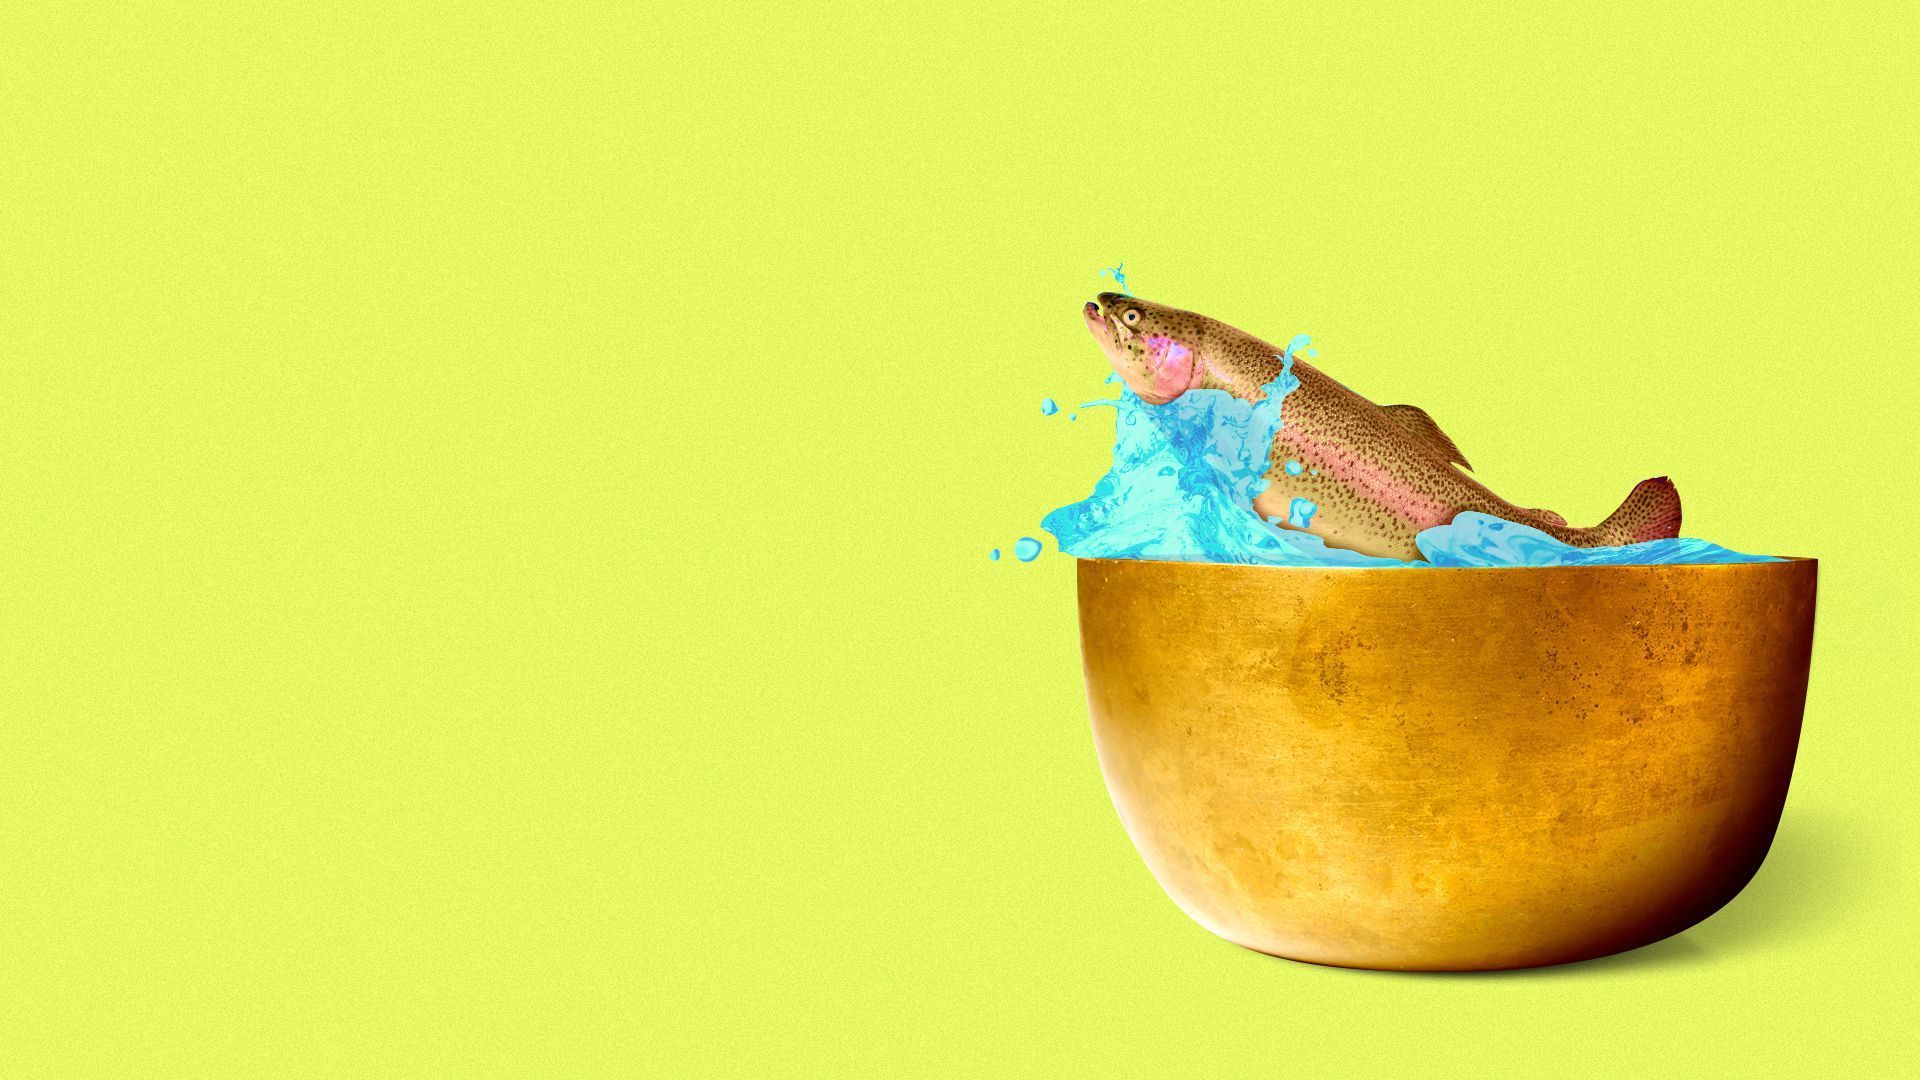 Illustration of a salmon jumping out of a copper bowl.